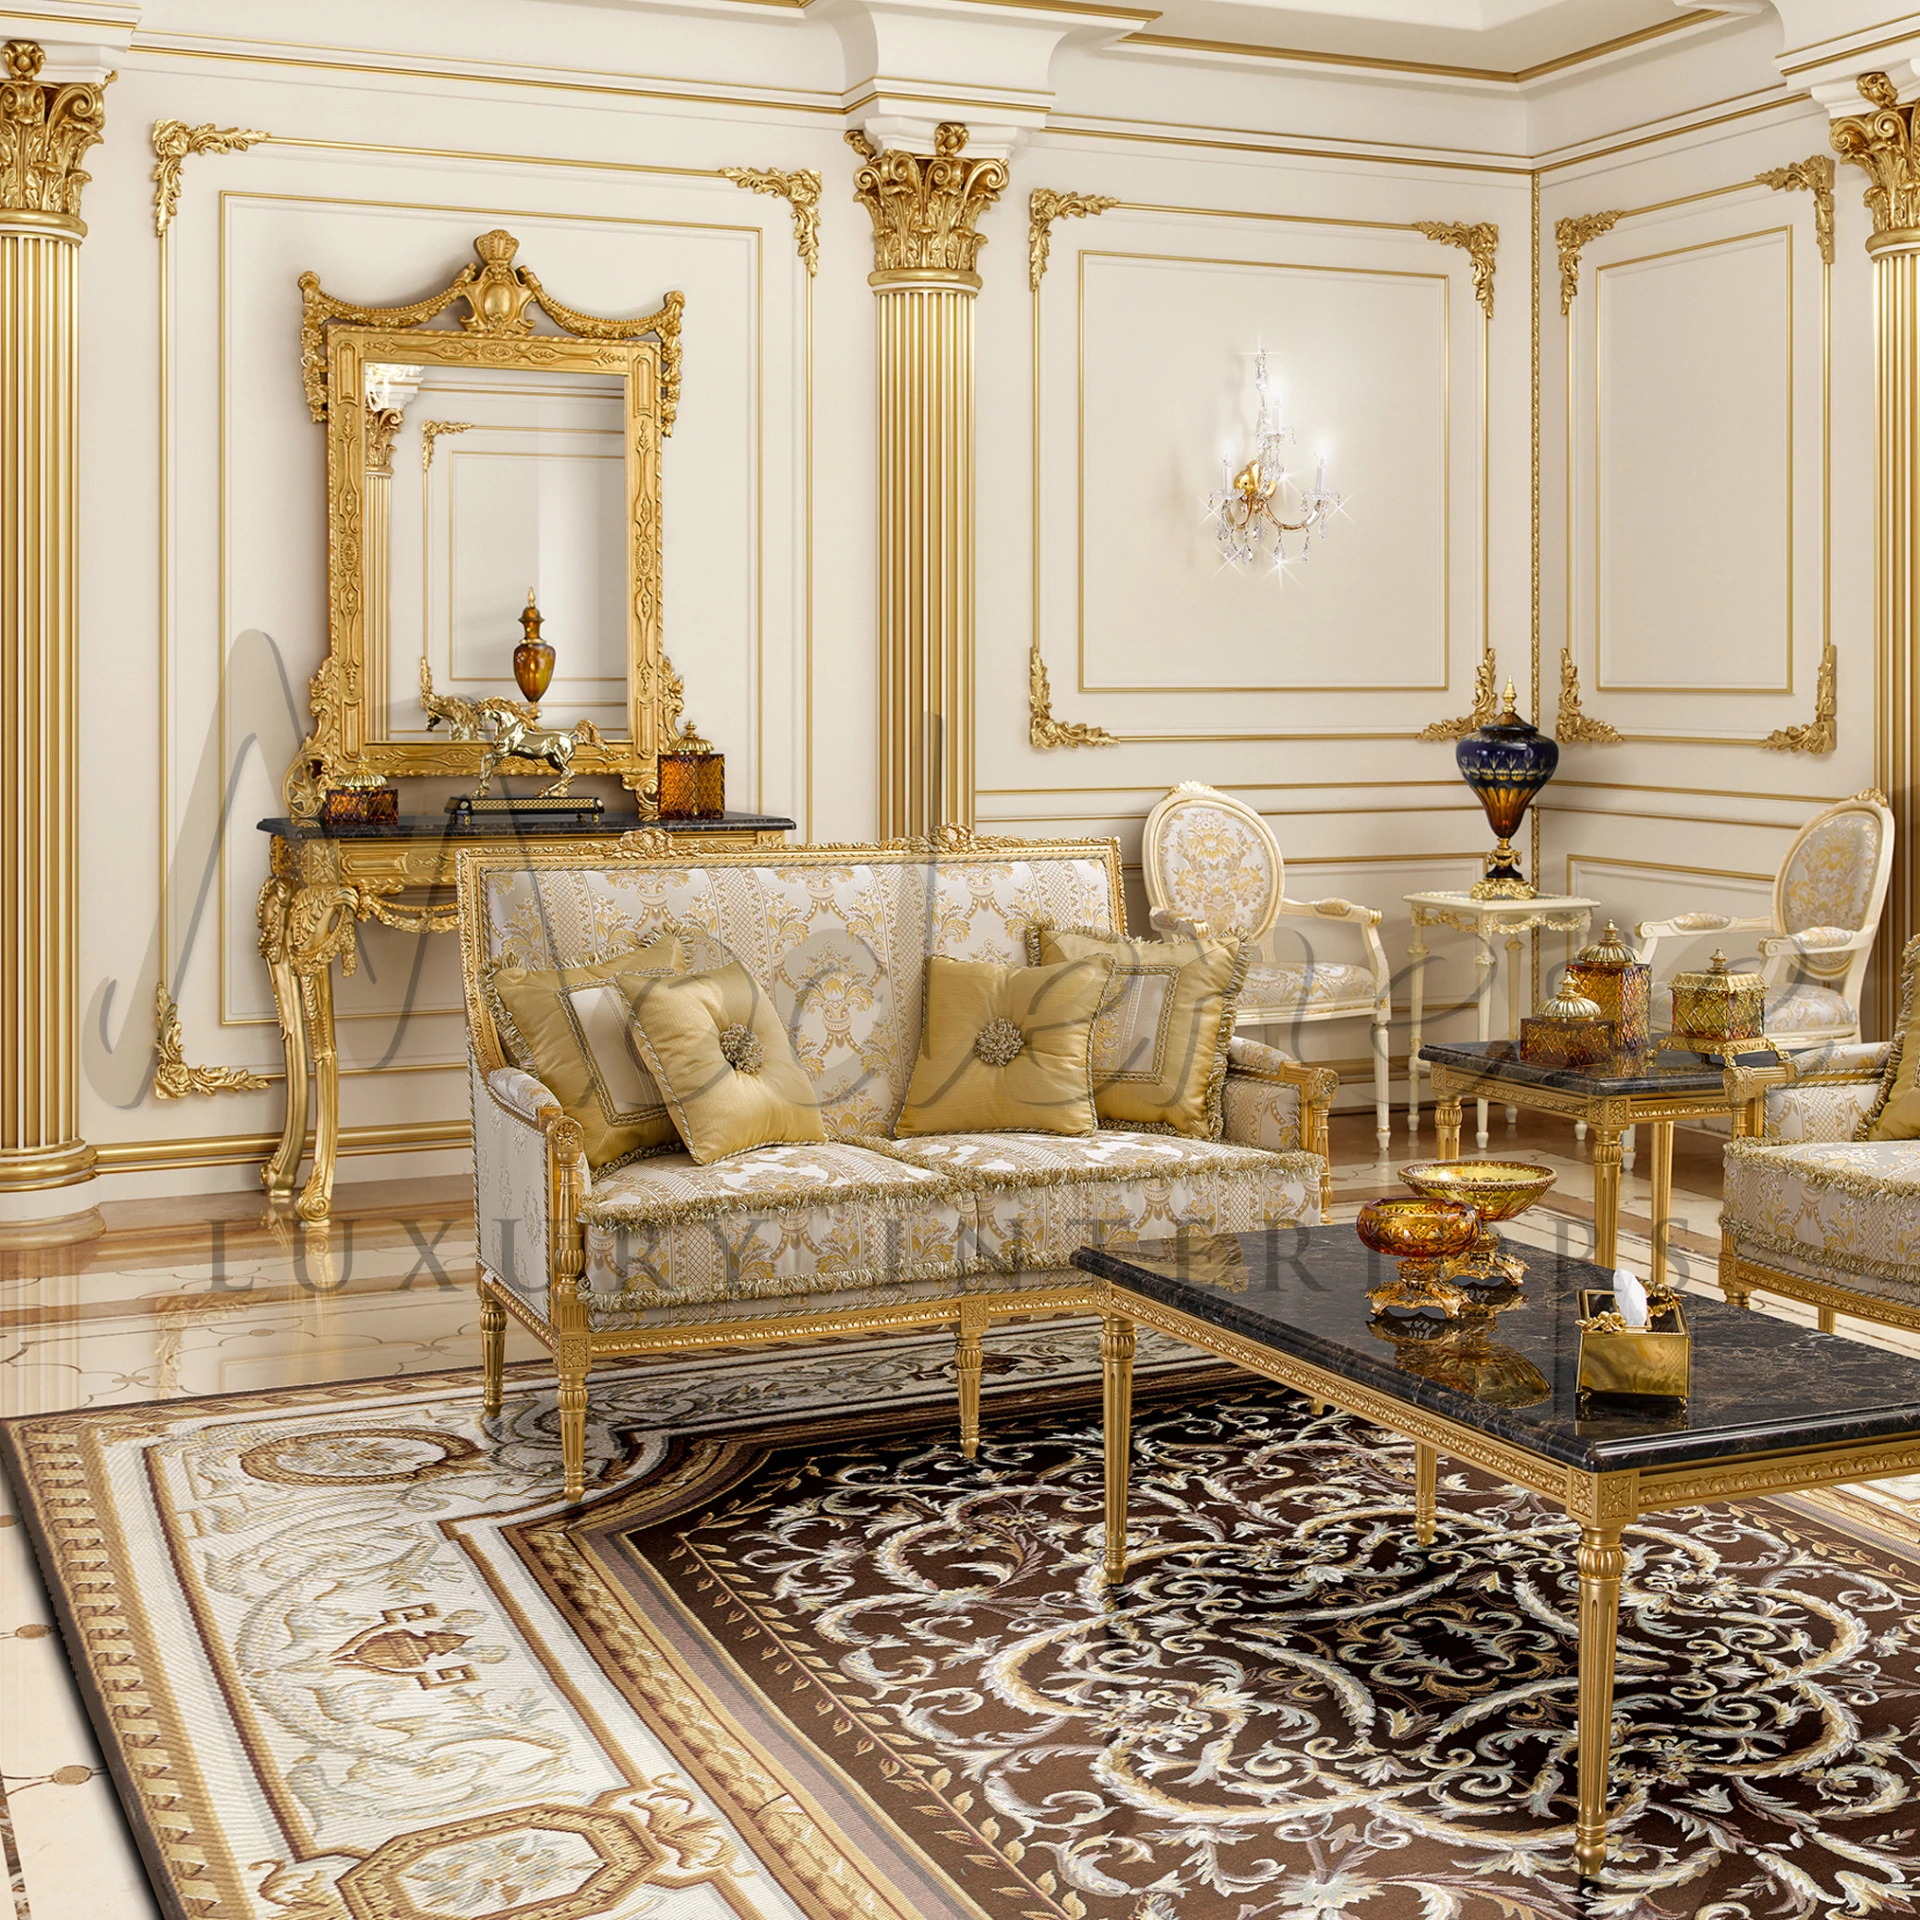 Enhance your interior with the Exquisite Gold Leaf Mirror, where traditional elegance meets noble Italian craftsmanship.